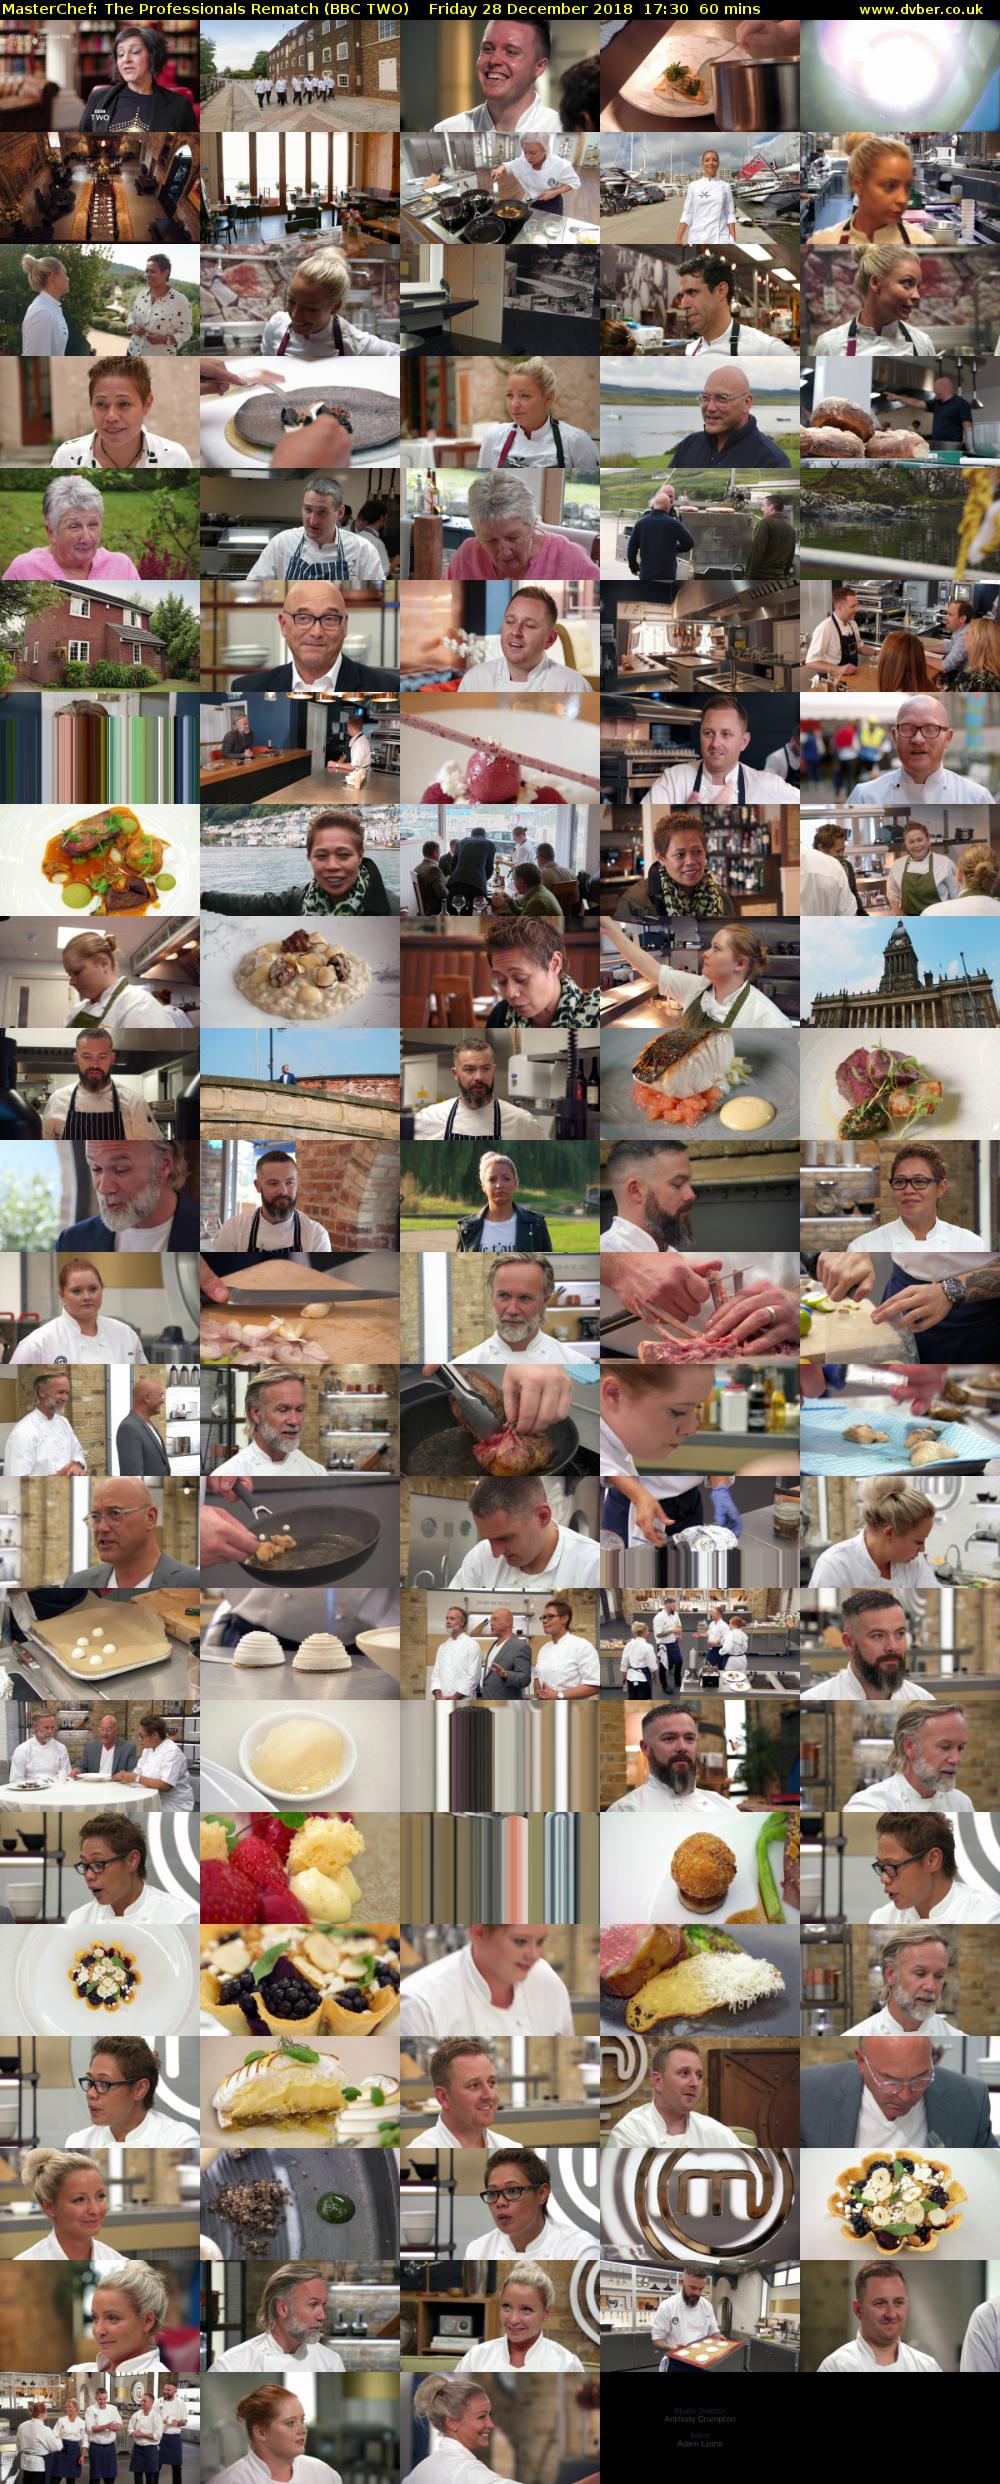 MasterChef: The Professionals Rematch (BBC TWO) Friday 28 December 2018 17:30 - 18:30